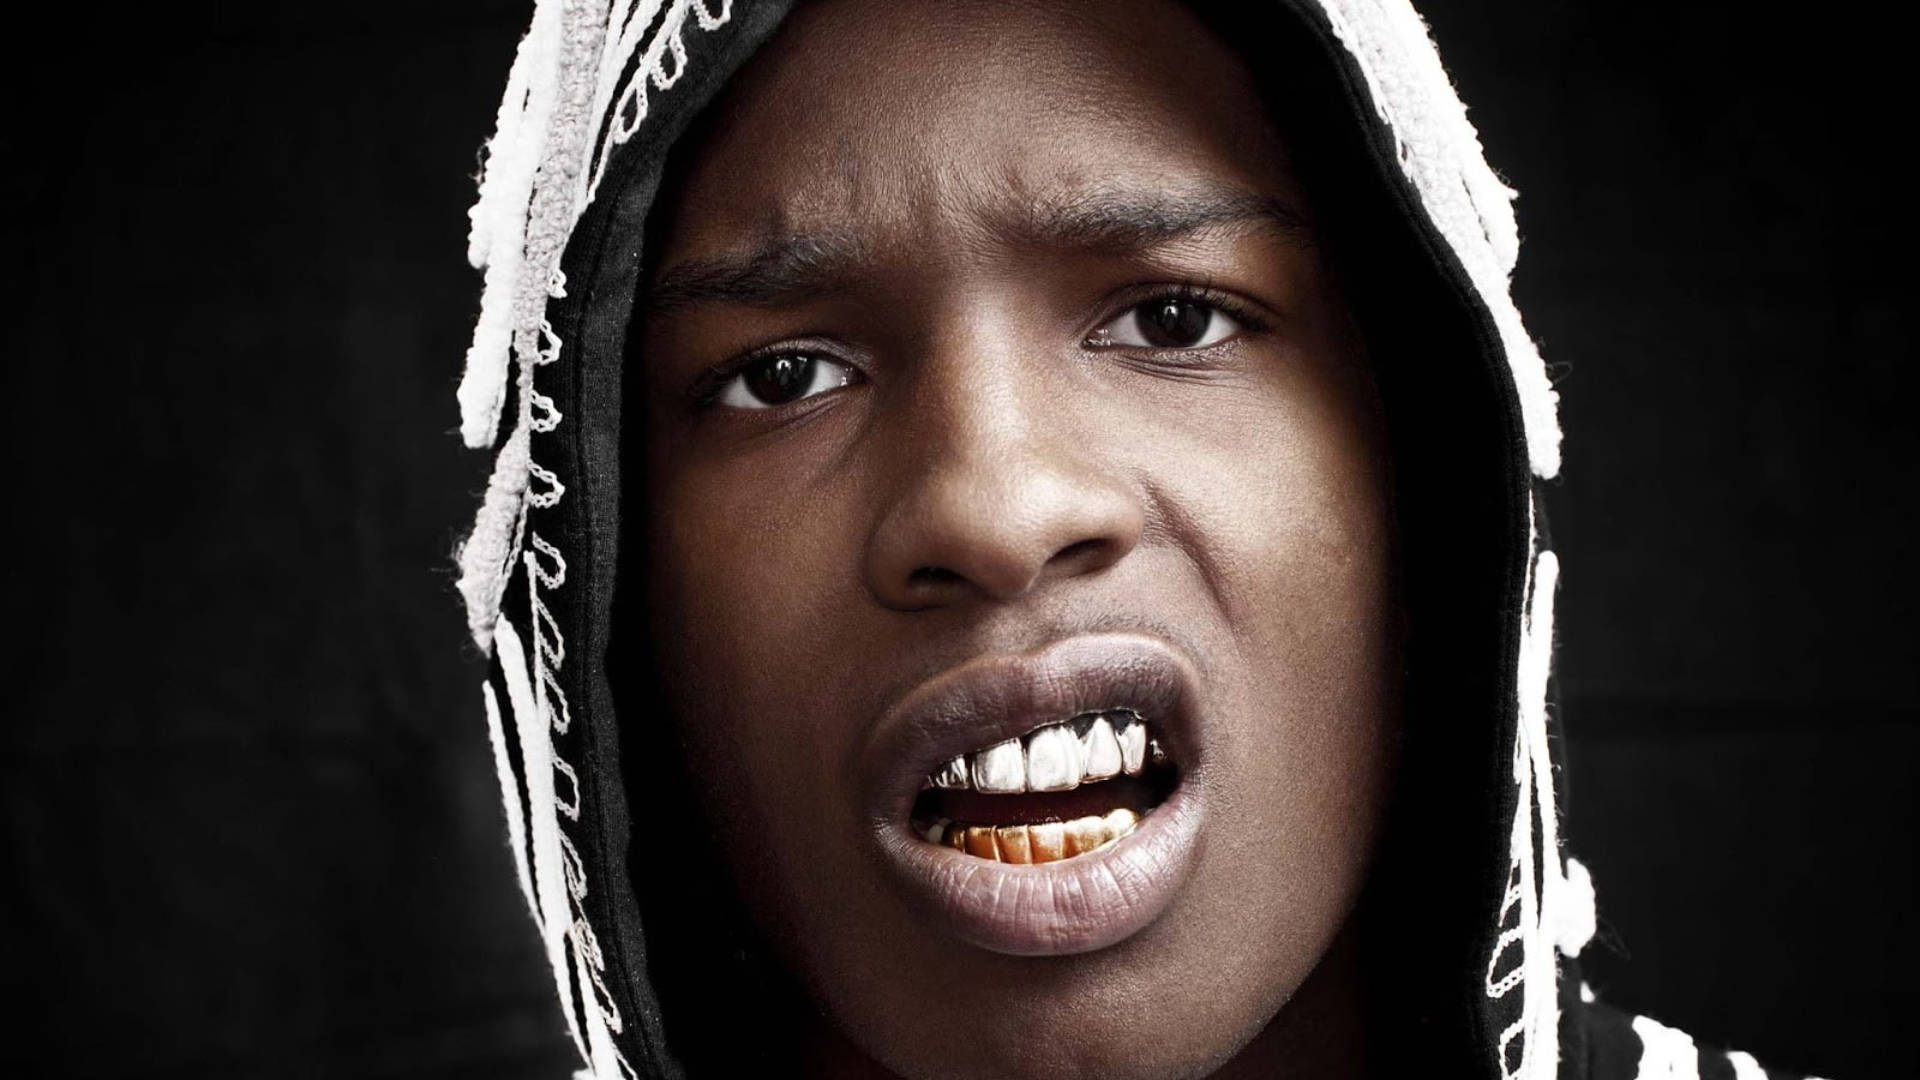 1920X1080 Asap Rocky Wallpaper and Background